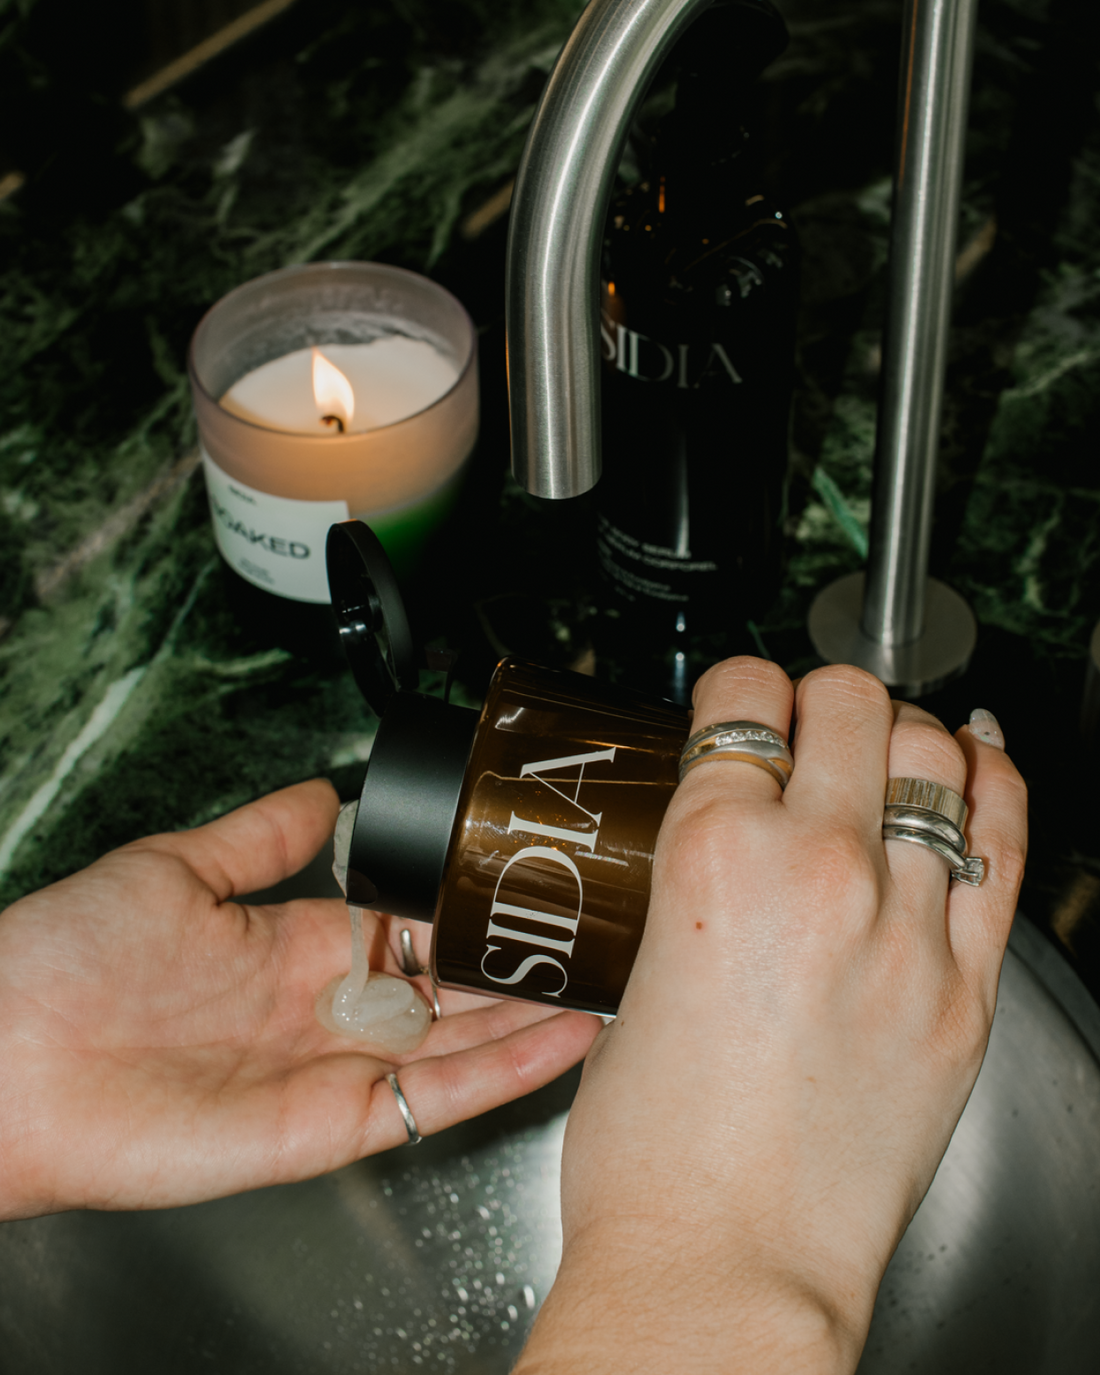 SIDIA Body Exfoliant being poured onto hand under sink - Formula Fig